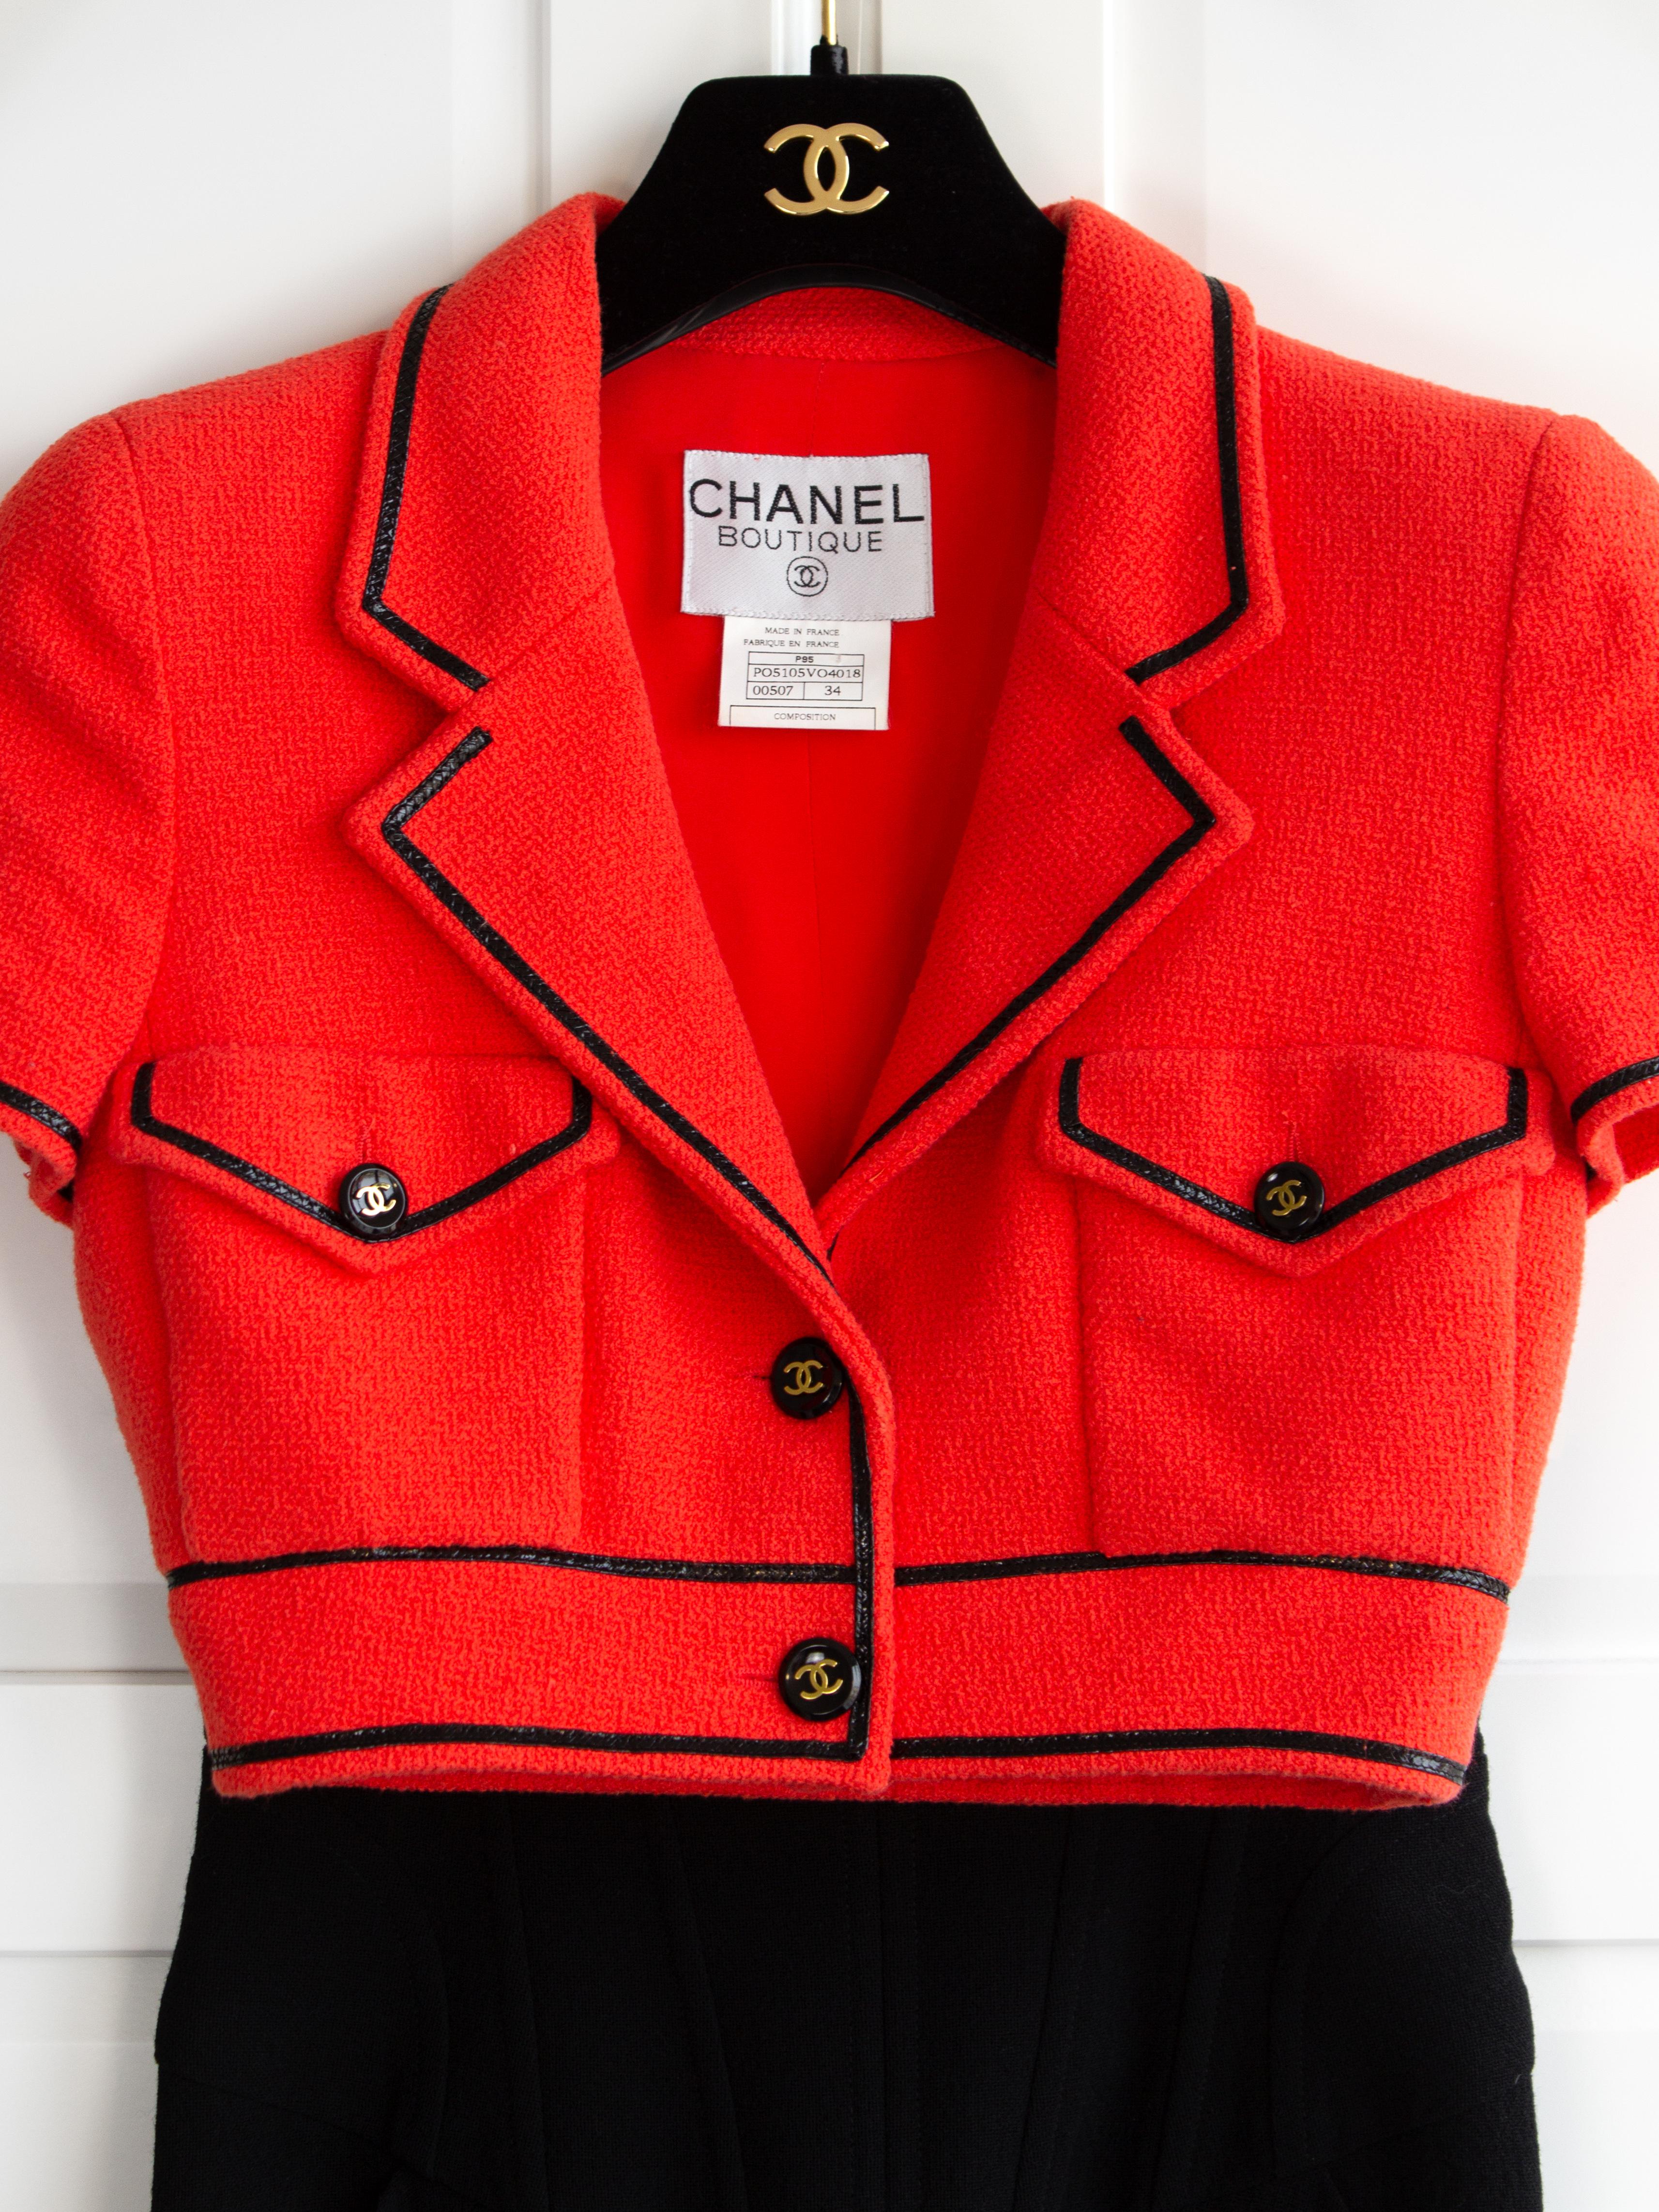 Iconic Chanel Vintage S/S 1995 Barbie Cropped Red Black 95P Jacket Corset Skirt  2